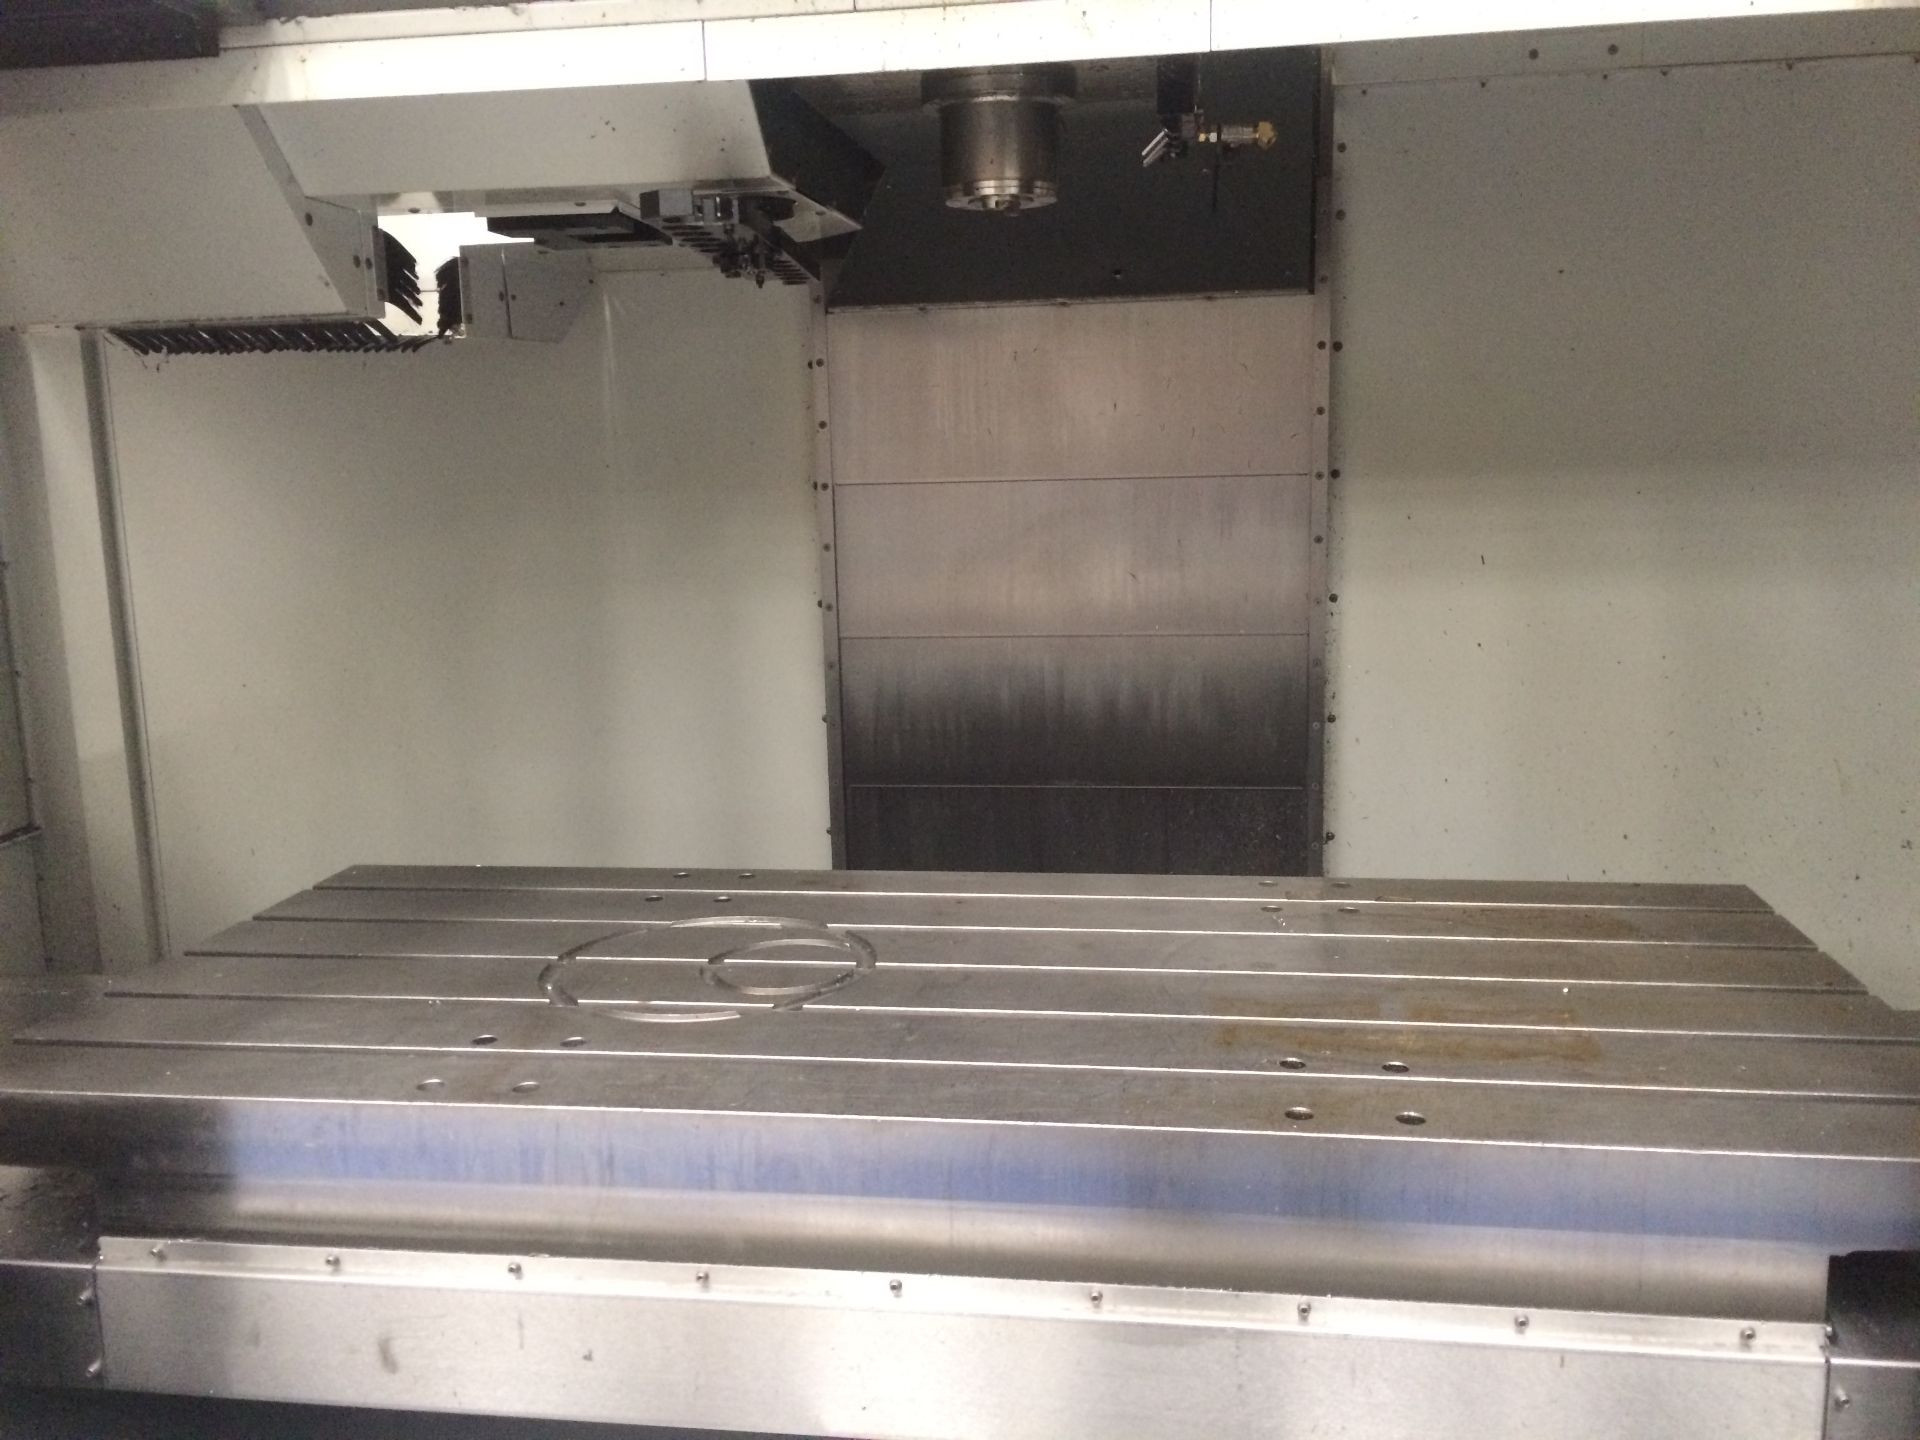 Haas VF-6/40 3 Axis CNC Vertical Machining Centre, - Image 2 of 3